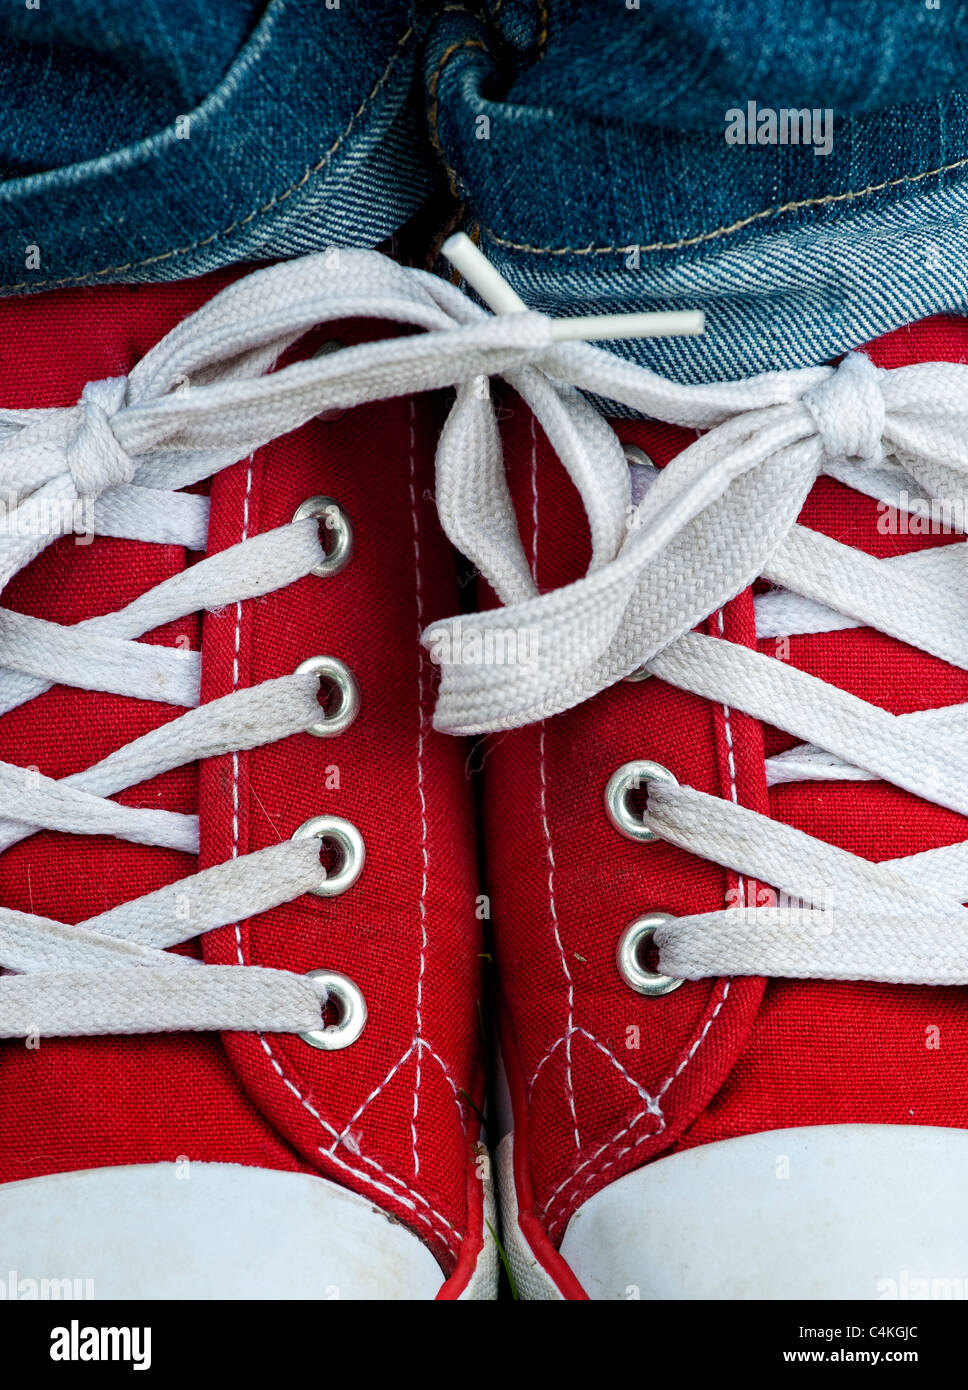 Red sneakers Stock Photo